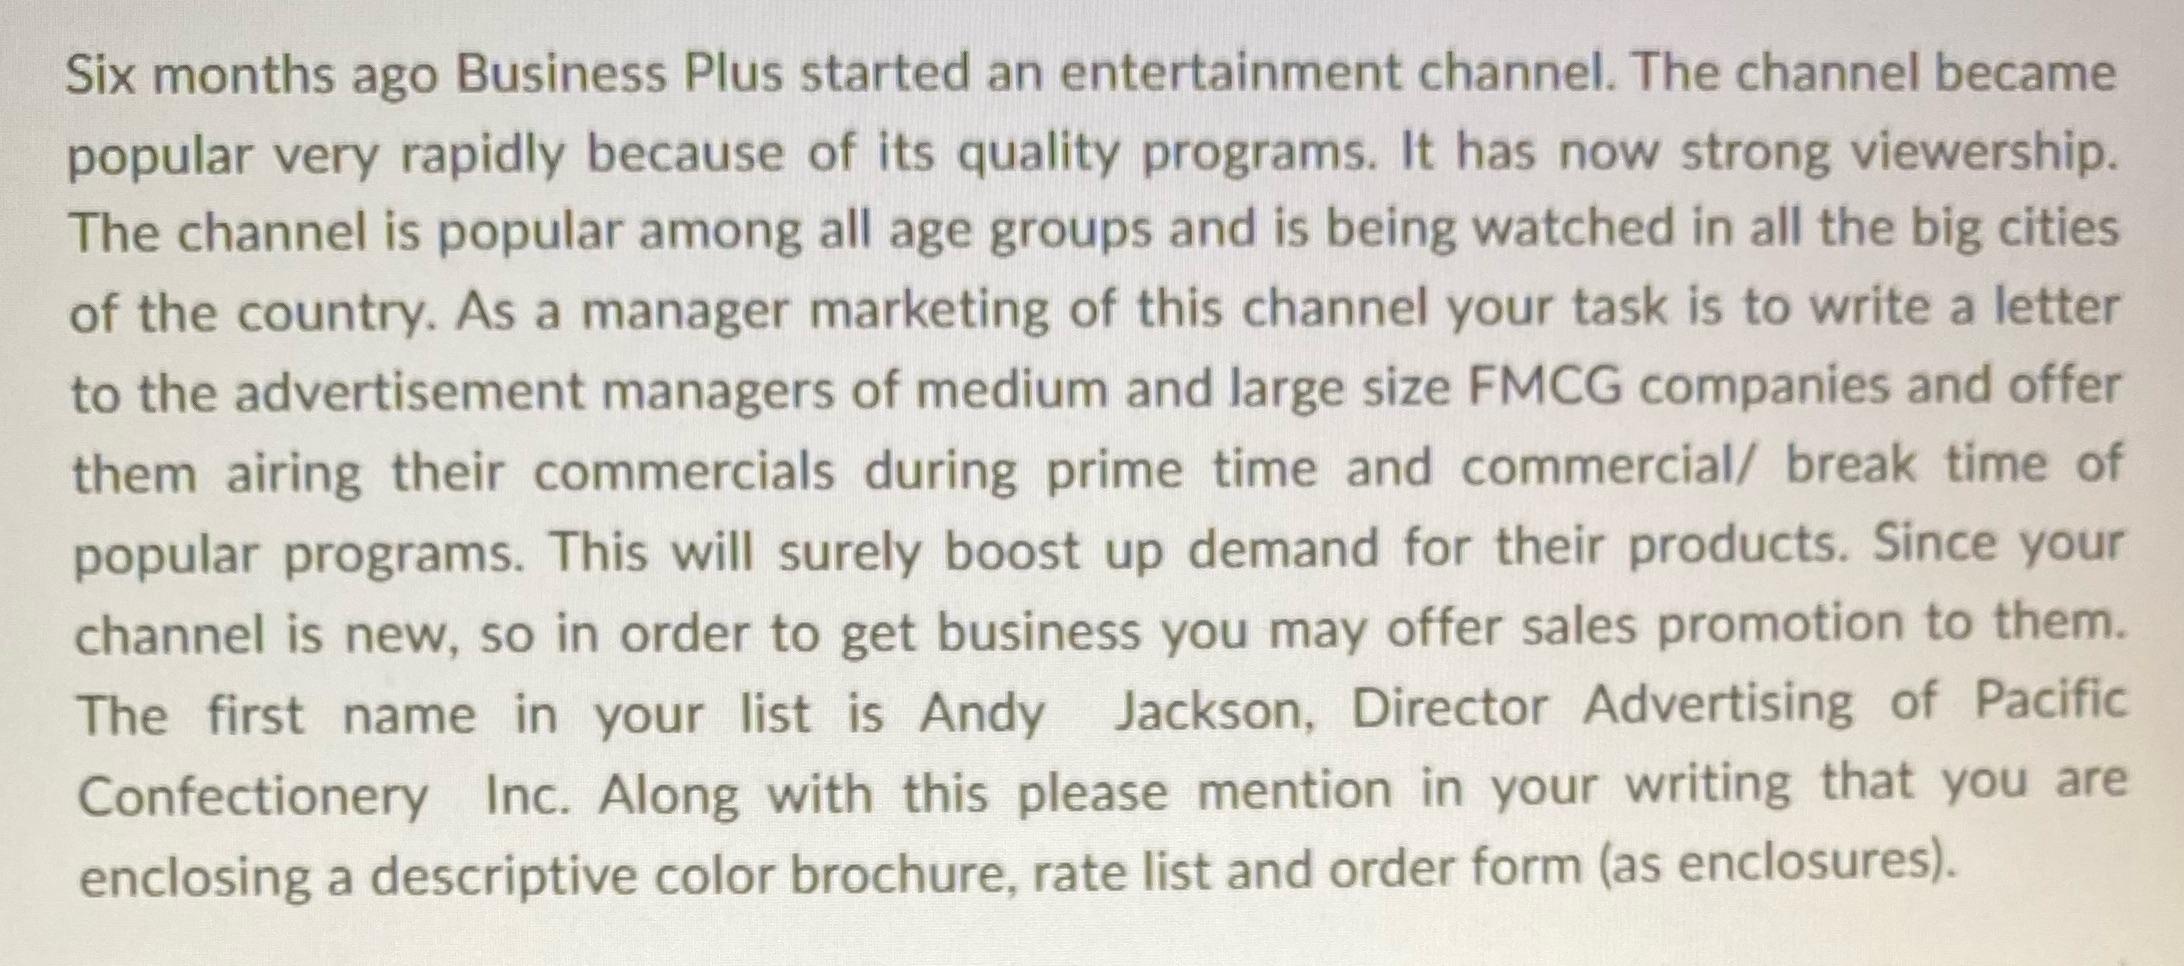 Six months ago Business Plus started an entertainment channel. The channel became popular very rapidly